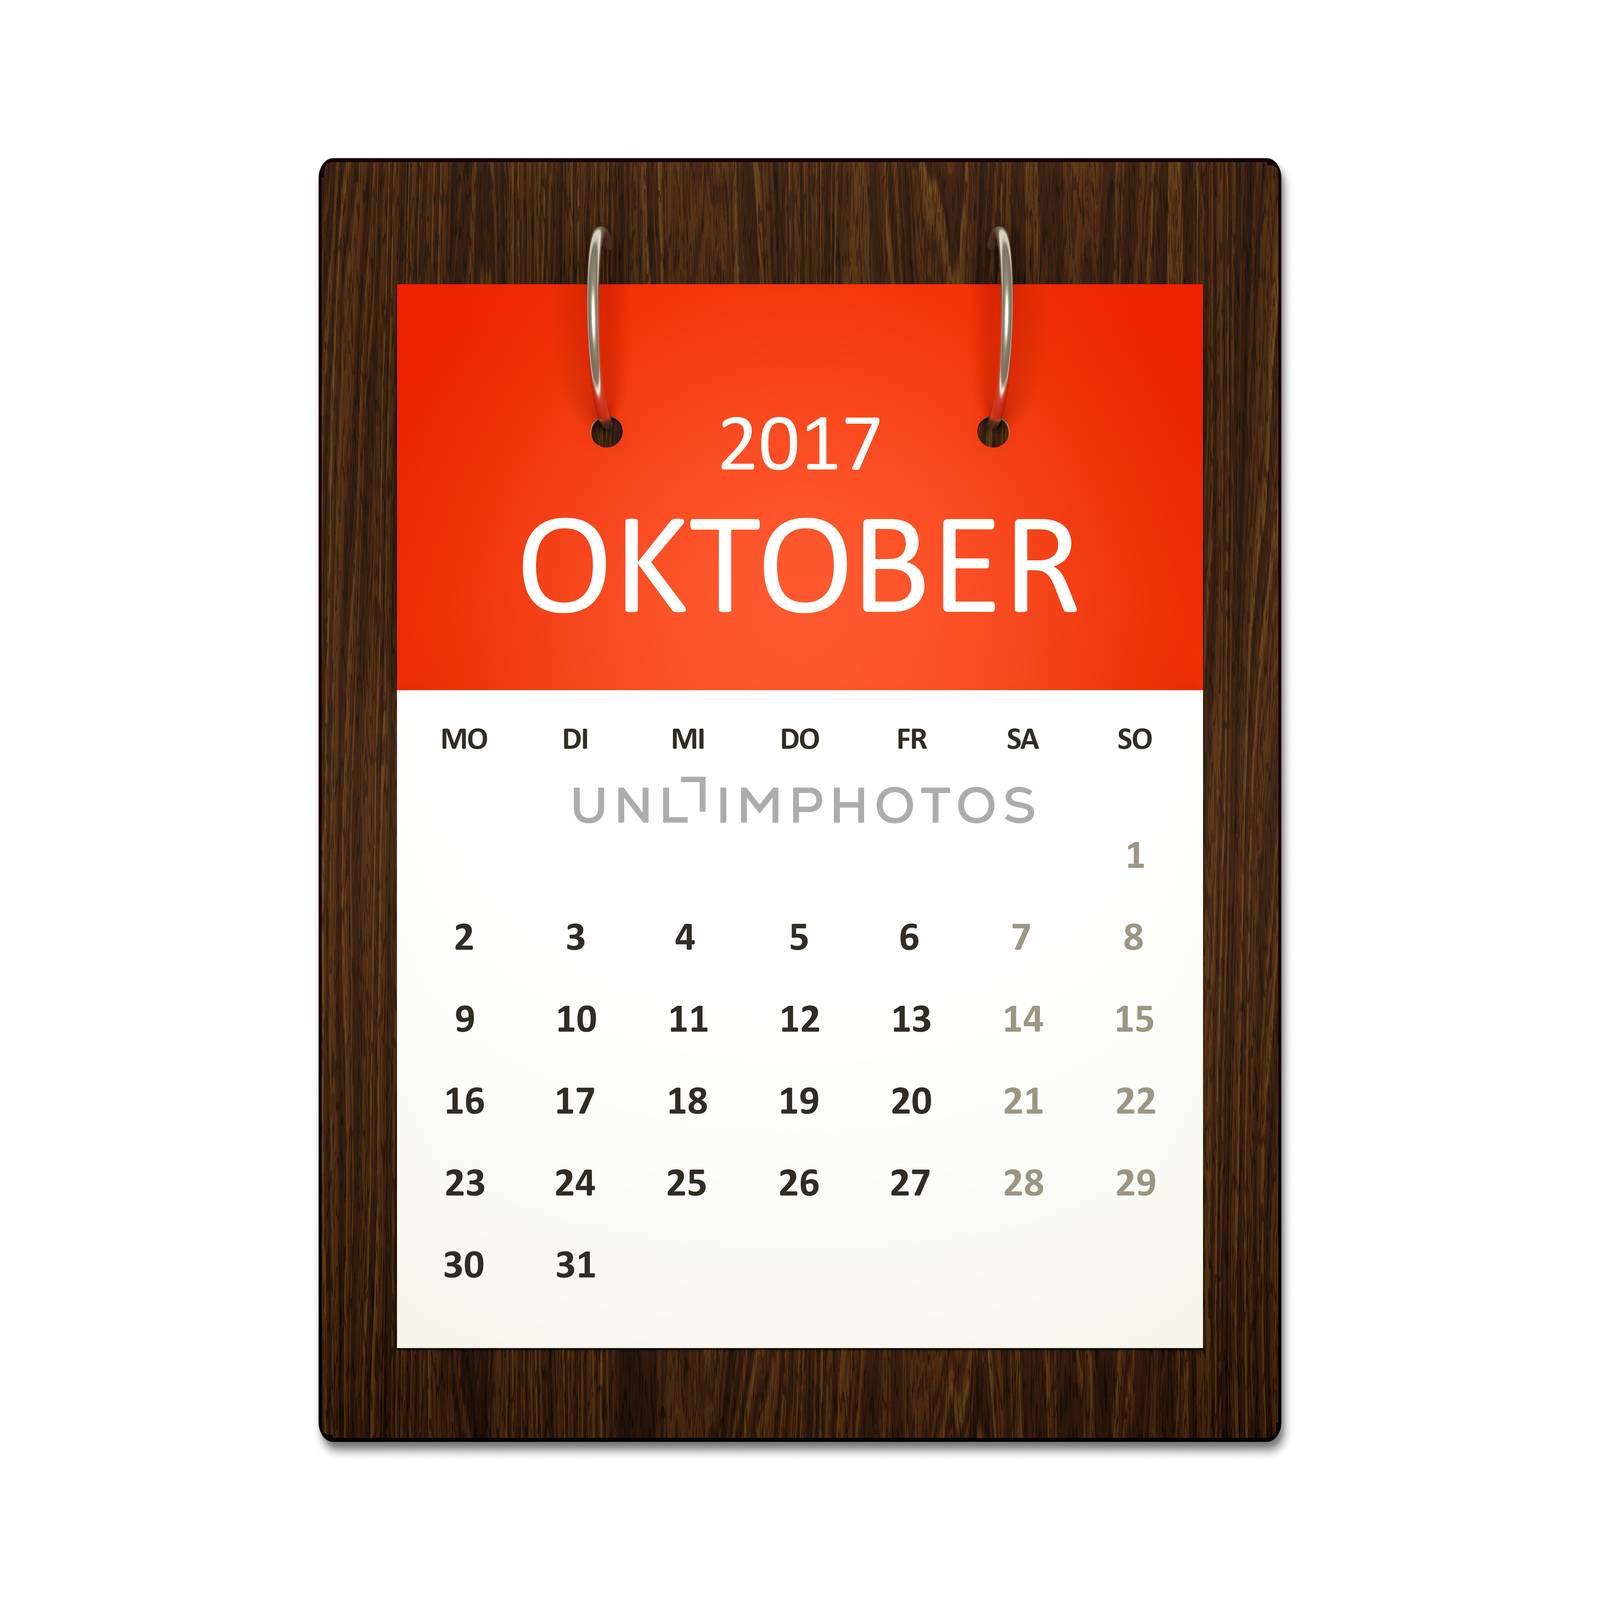 An image of a german calendar for event planning 2017 october